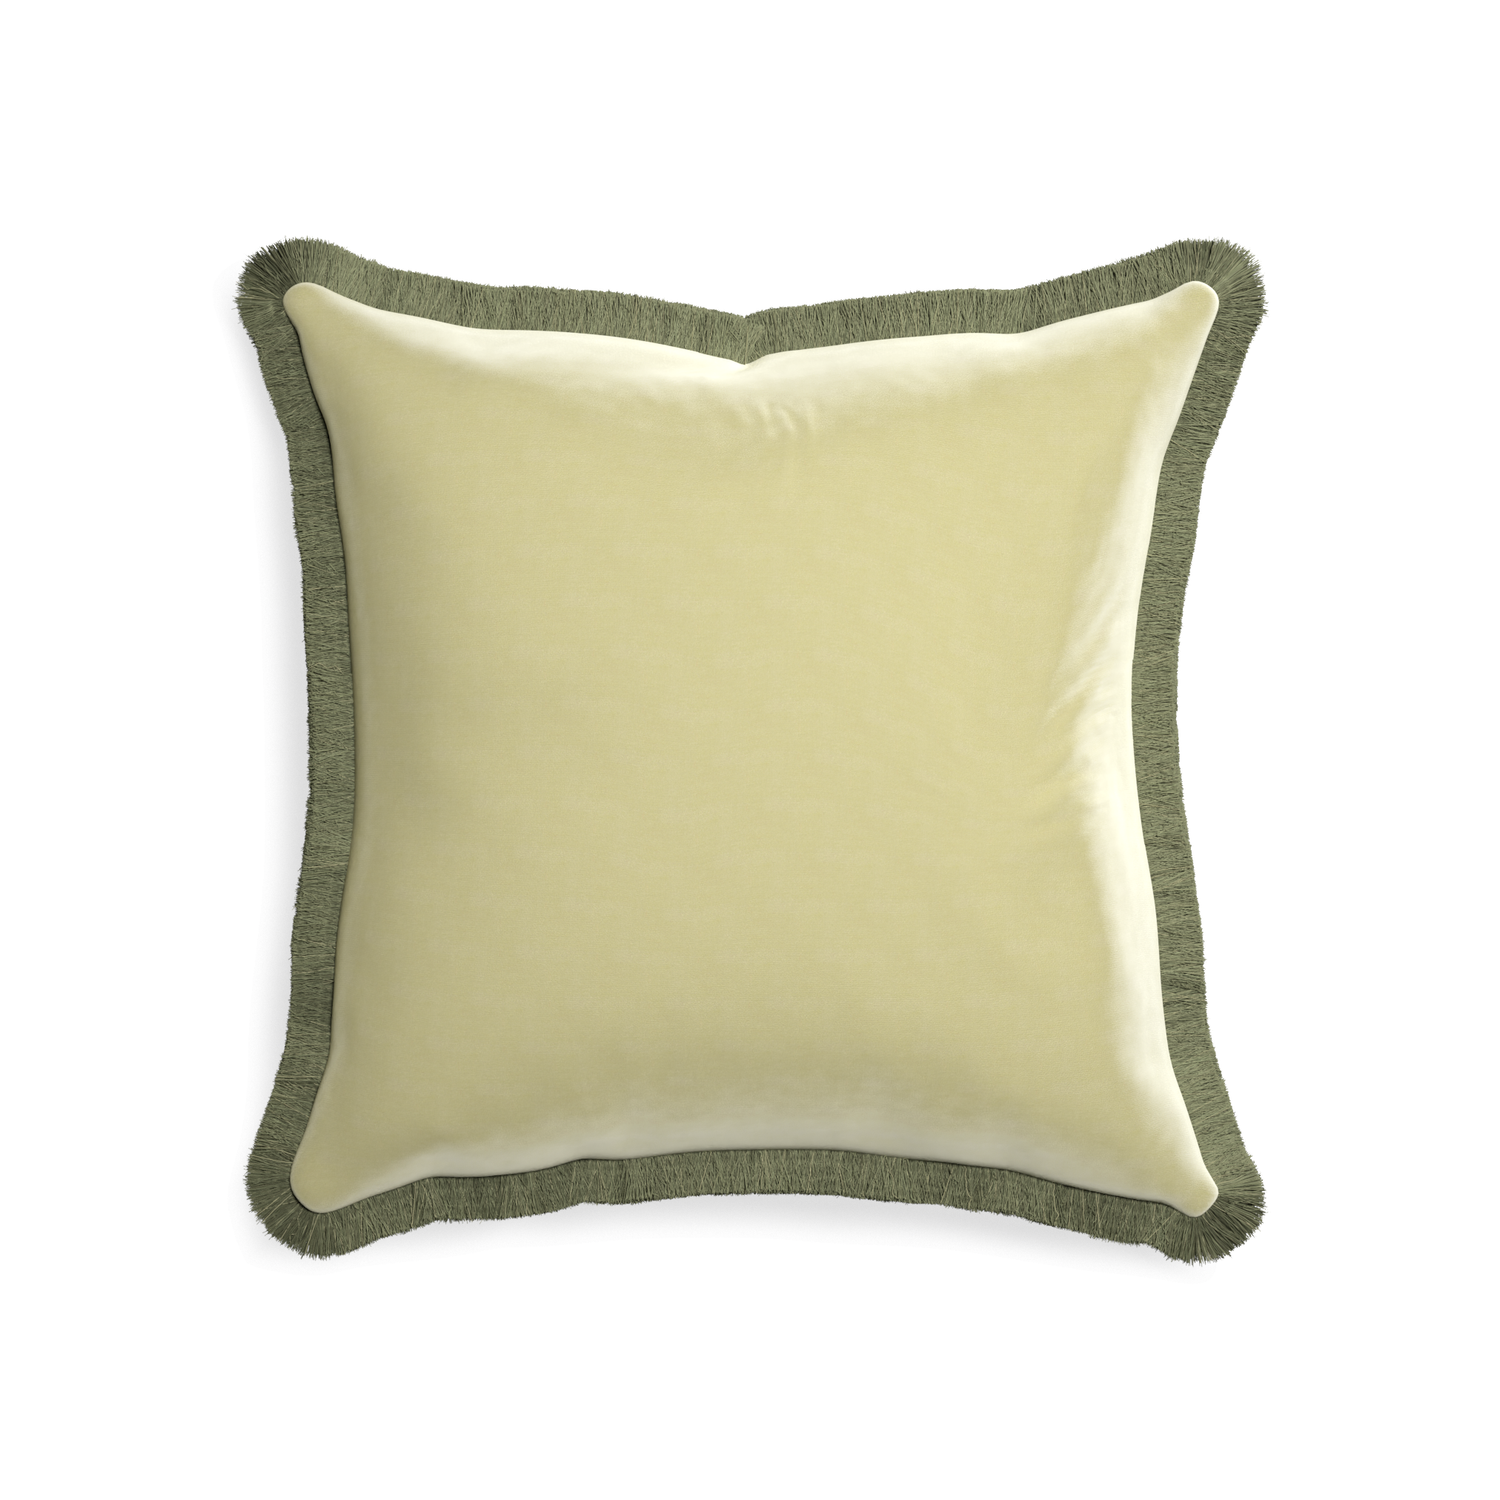 square light green pillow with sage green fringe